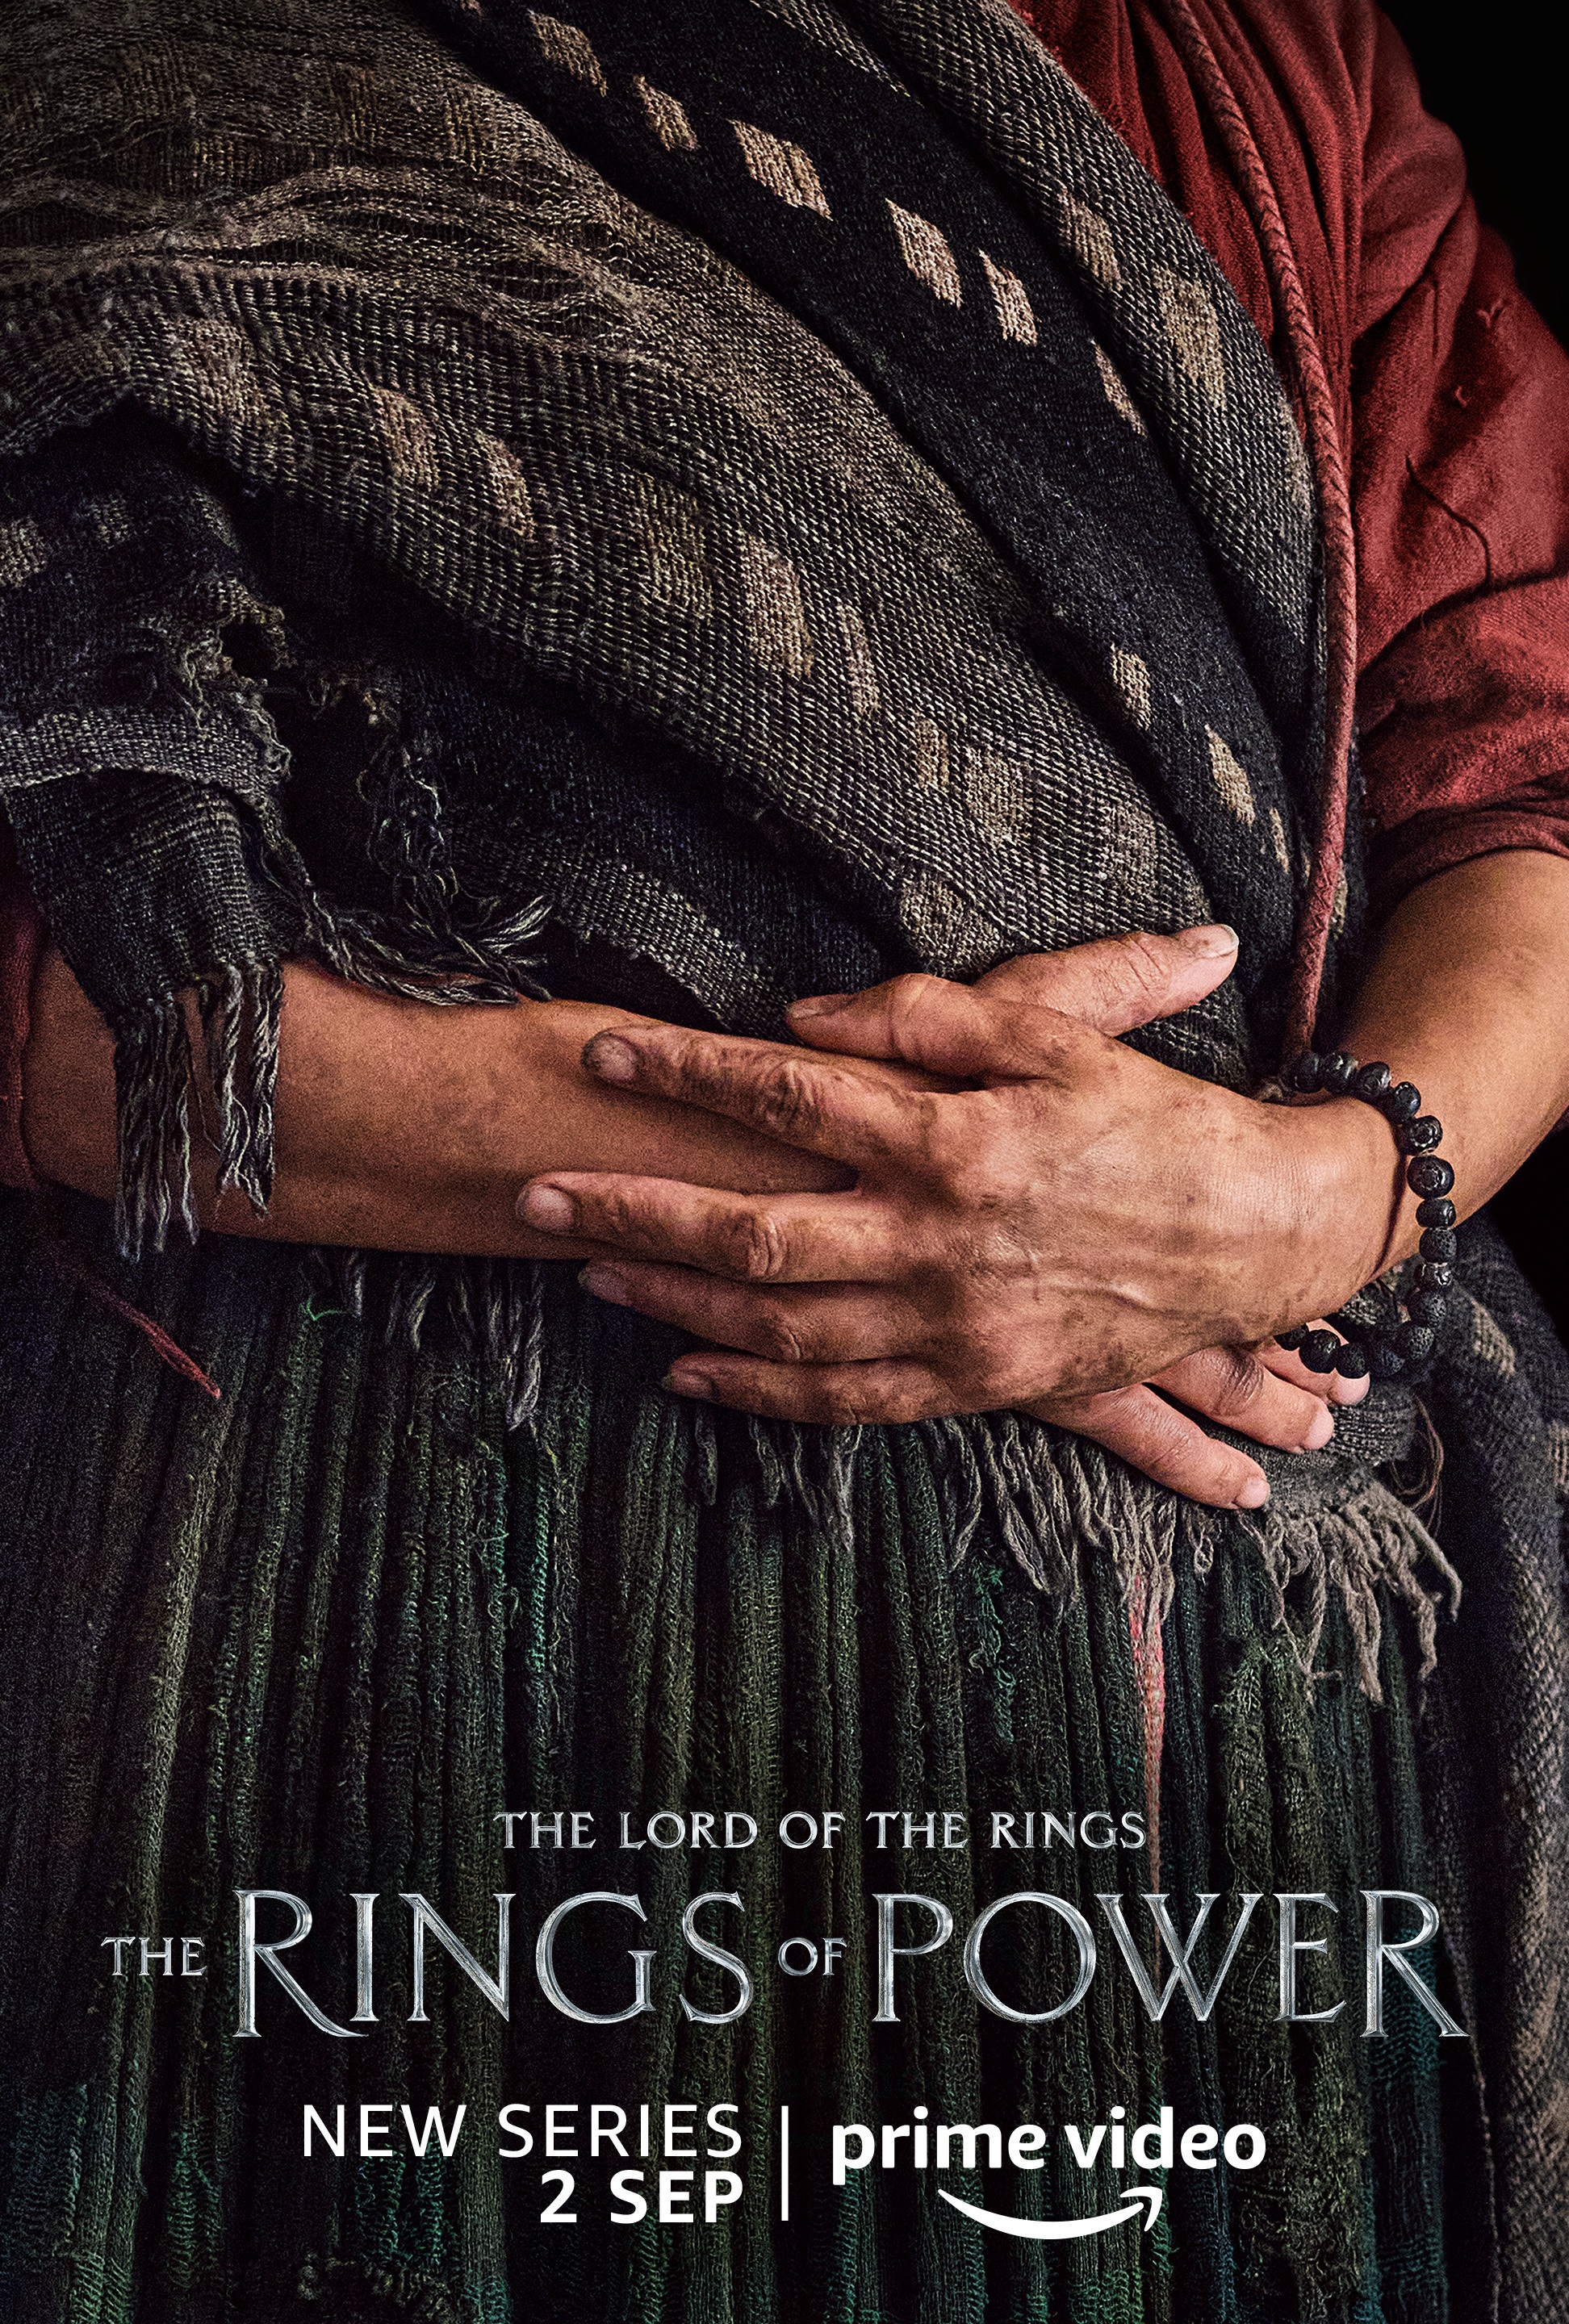 A female character poster for Lord of the Rings: The Rings of Power